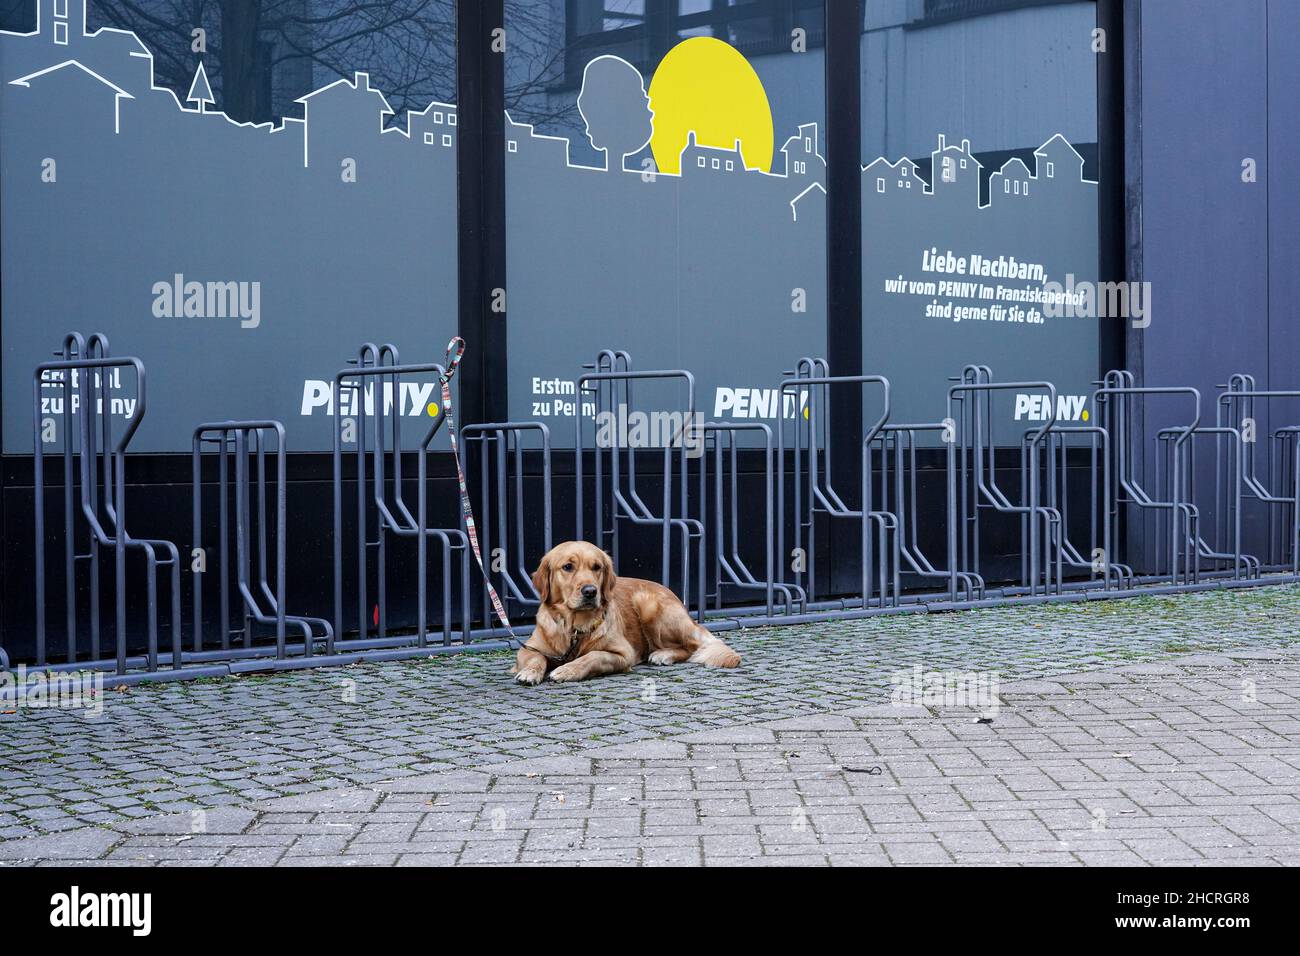 A dog is lying on the ground in front of a supermarket, tied to a bicycle stand, waiting for its owner to come back from shopping. Stock Photo